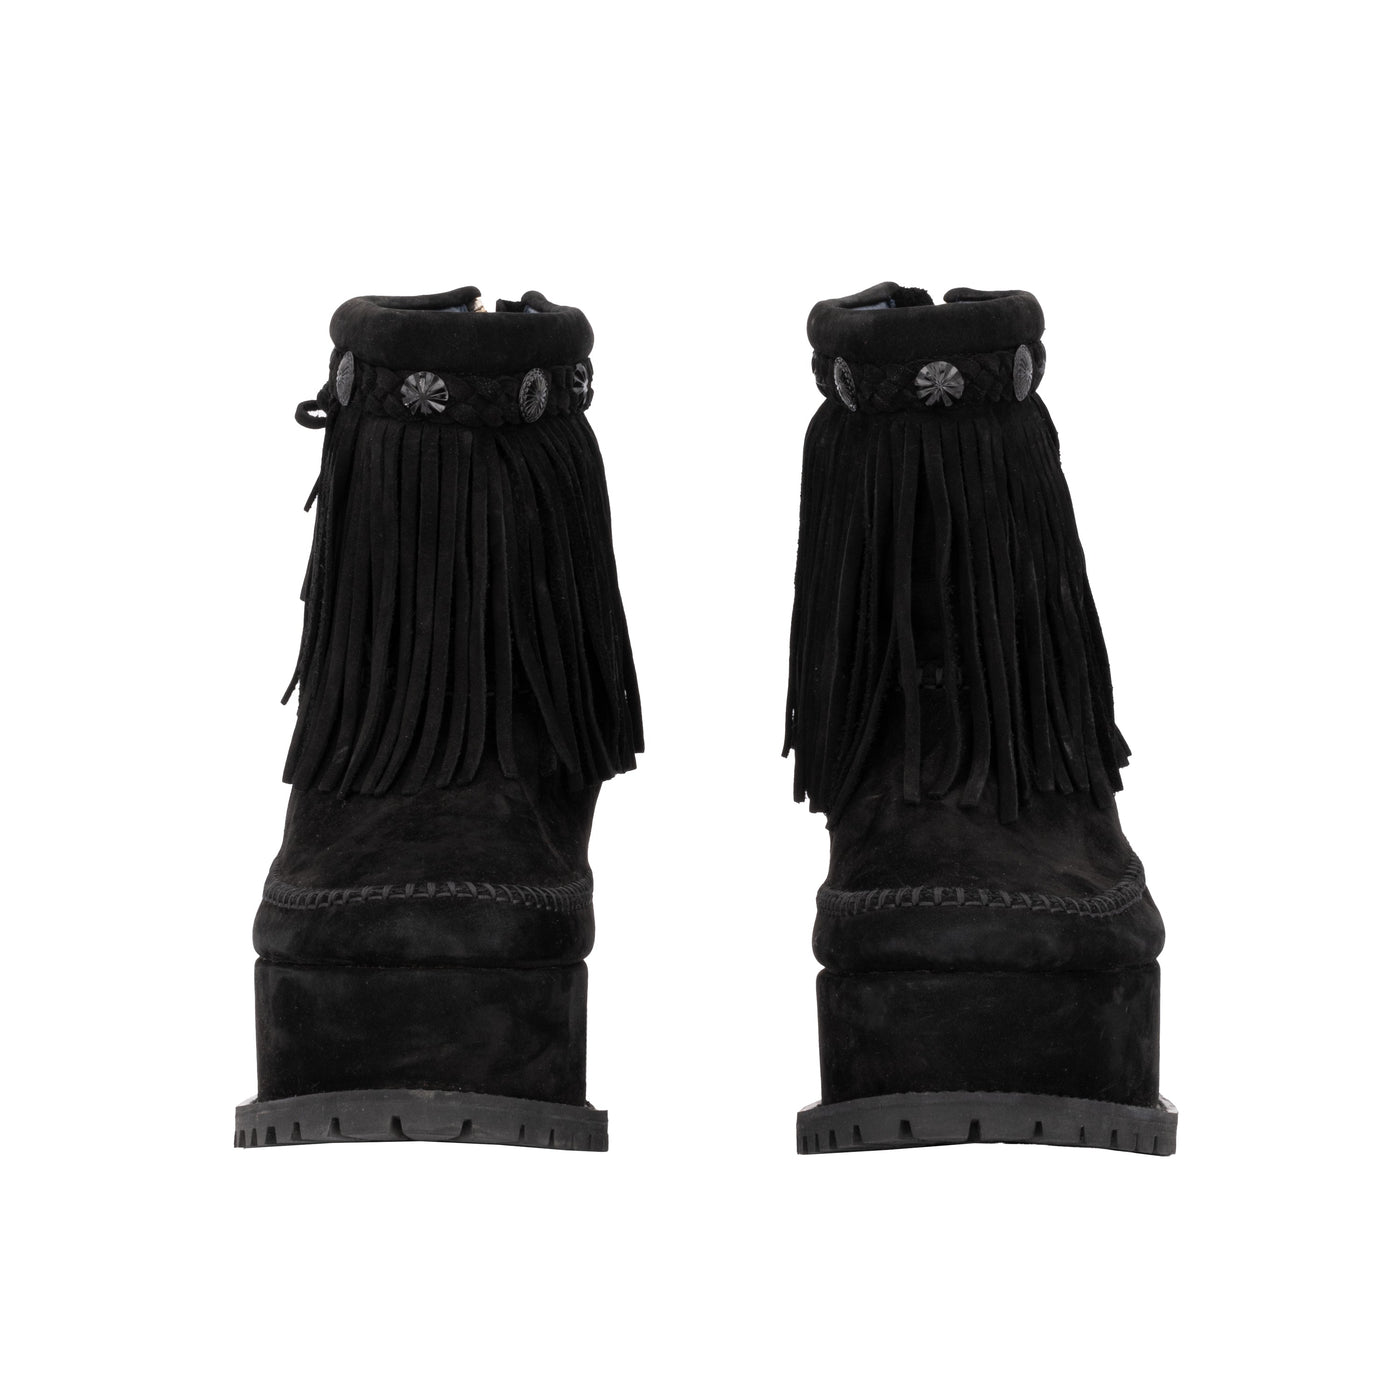 Sacai suede leather fringed ankle boots with platform pre-owned